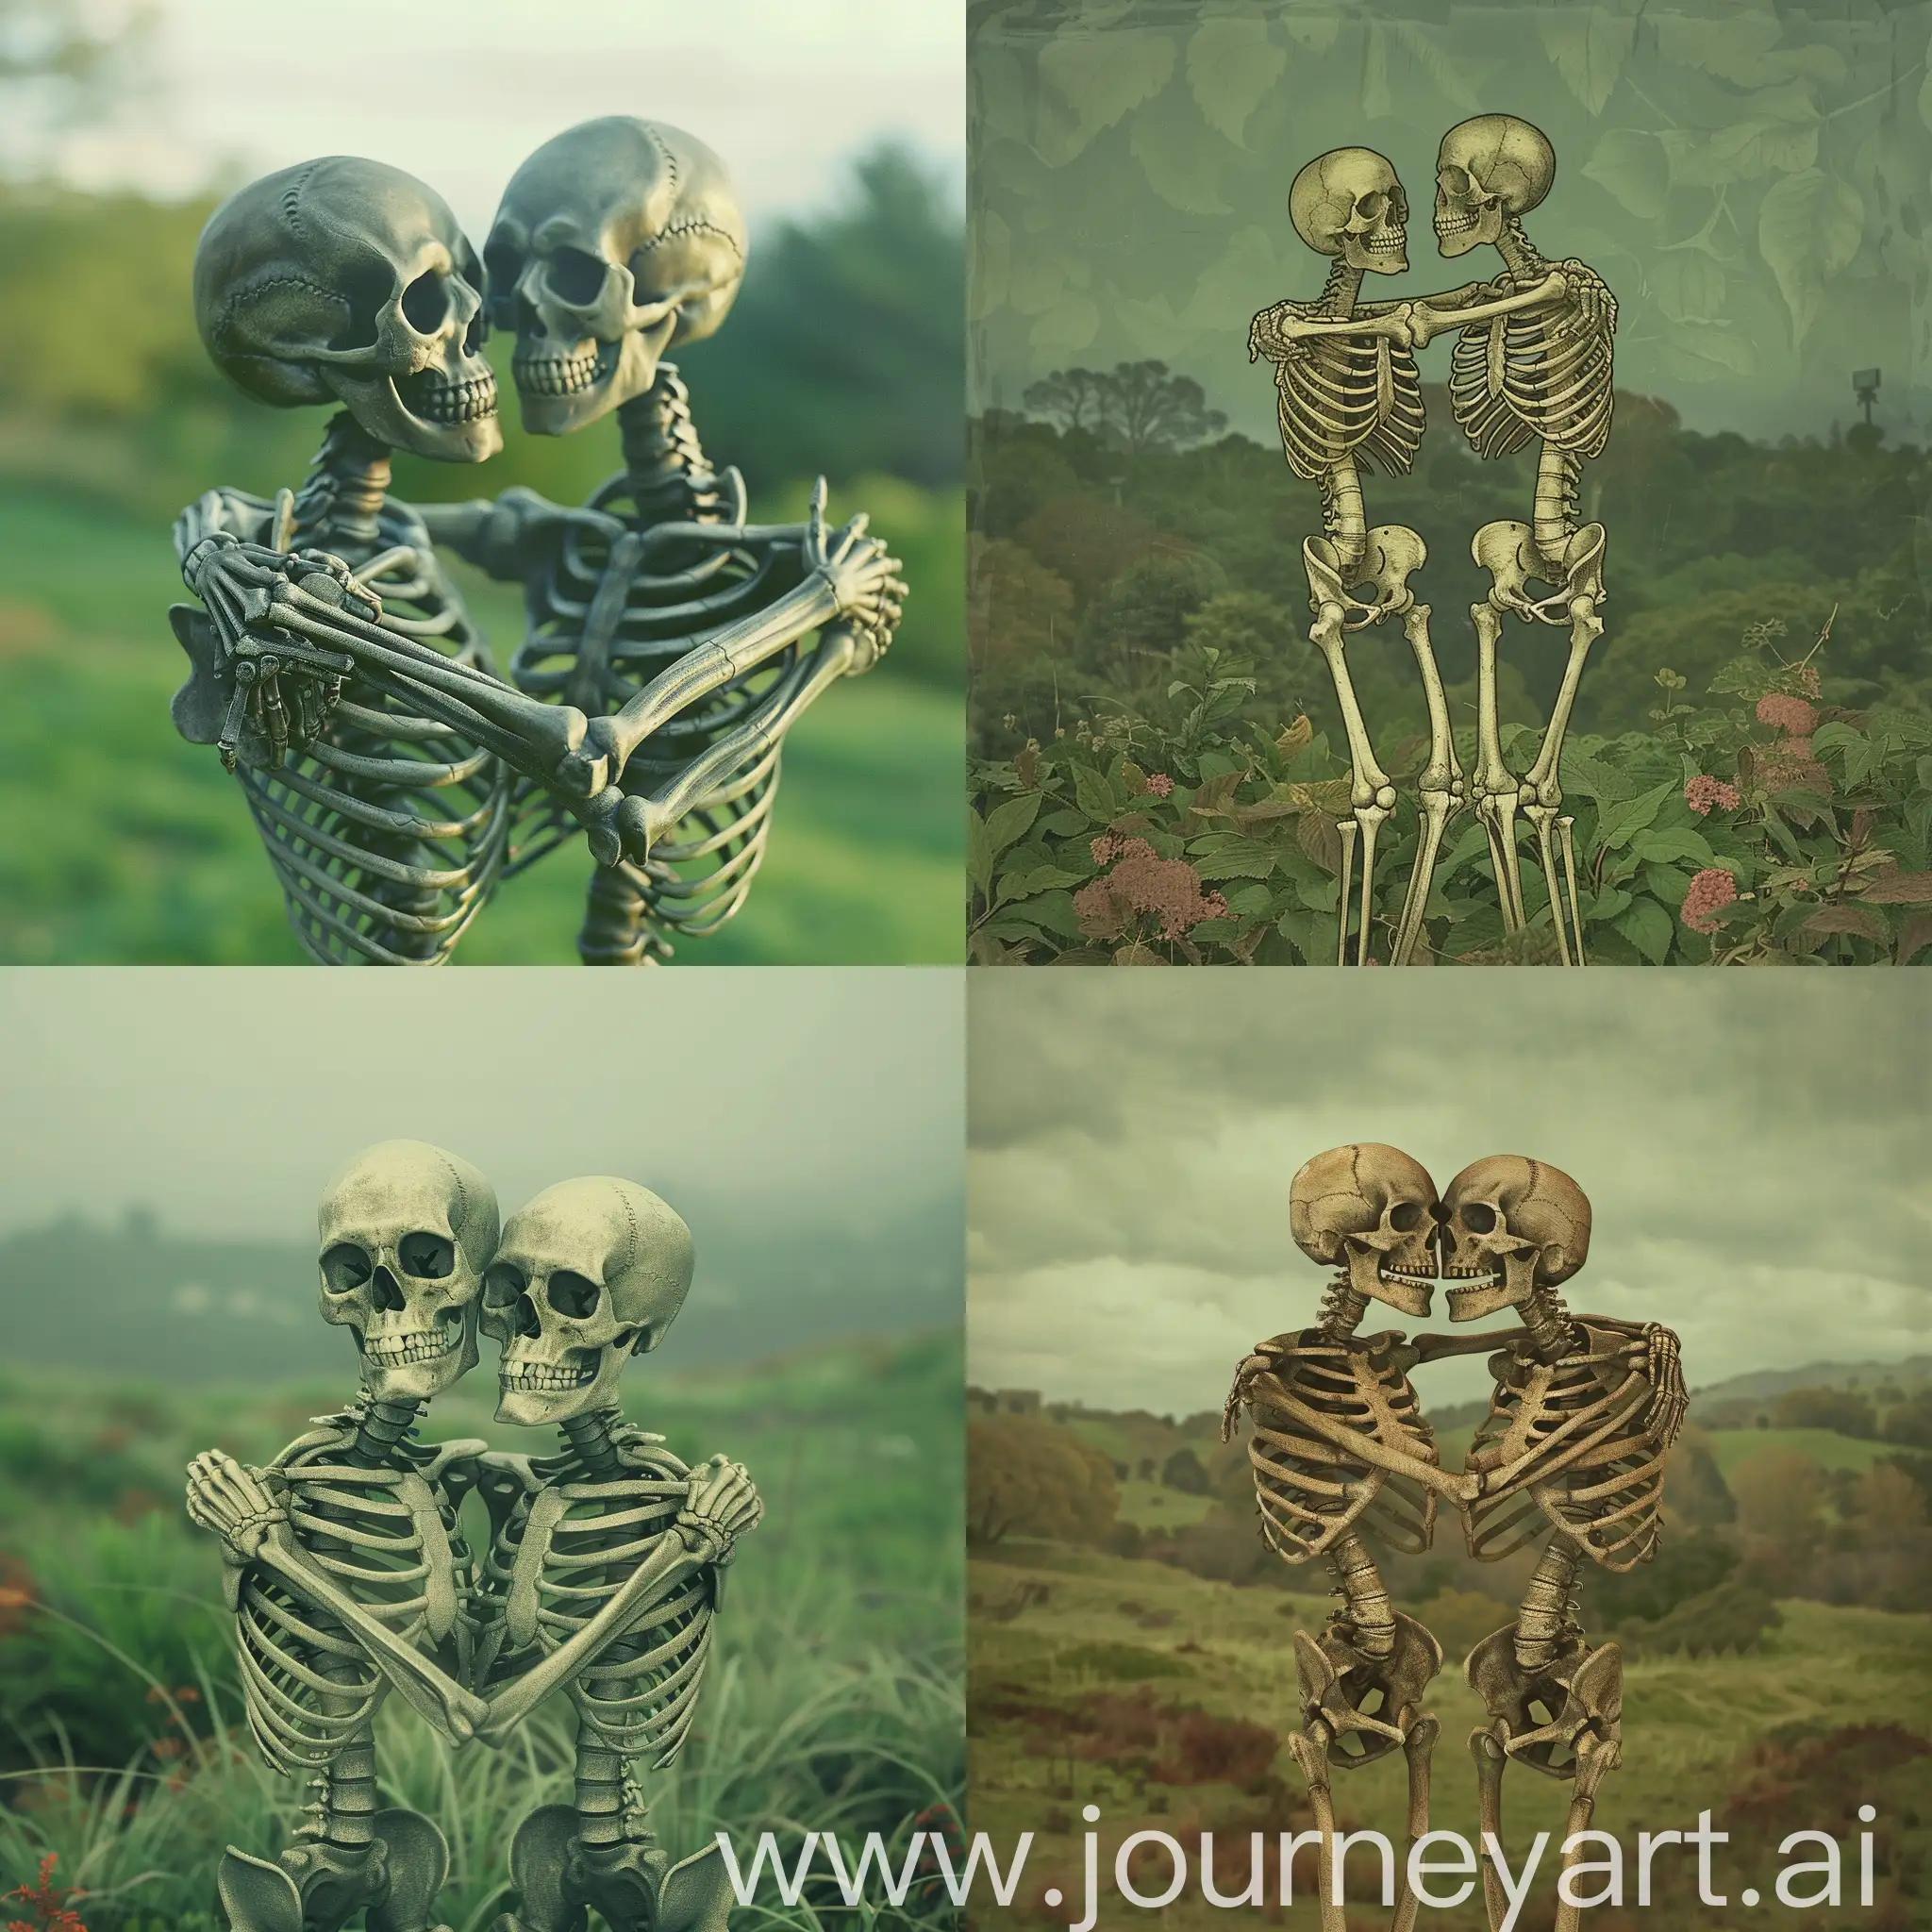 Two skeletons stood hugging each other in the middle of a green field.